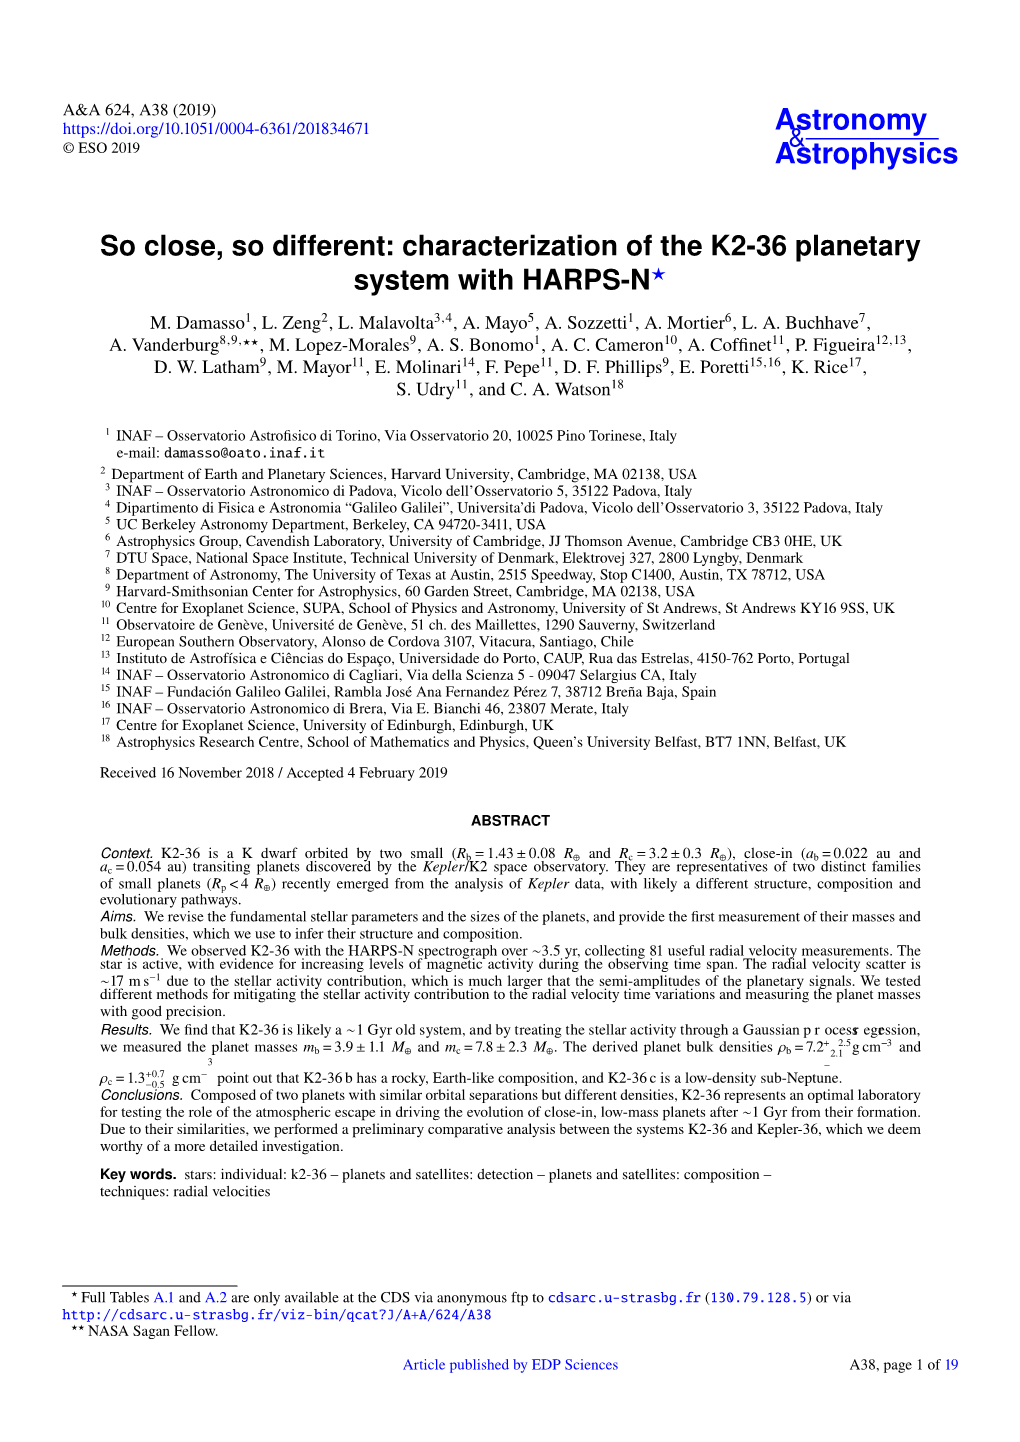 Characterization of the K2-36 Planetary System with HARPS-N? M